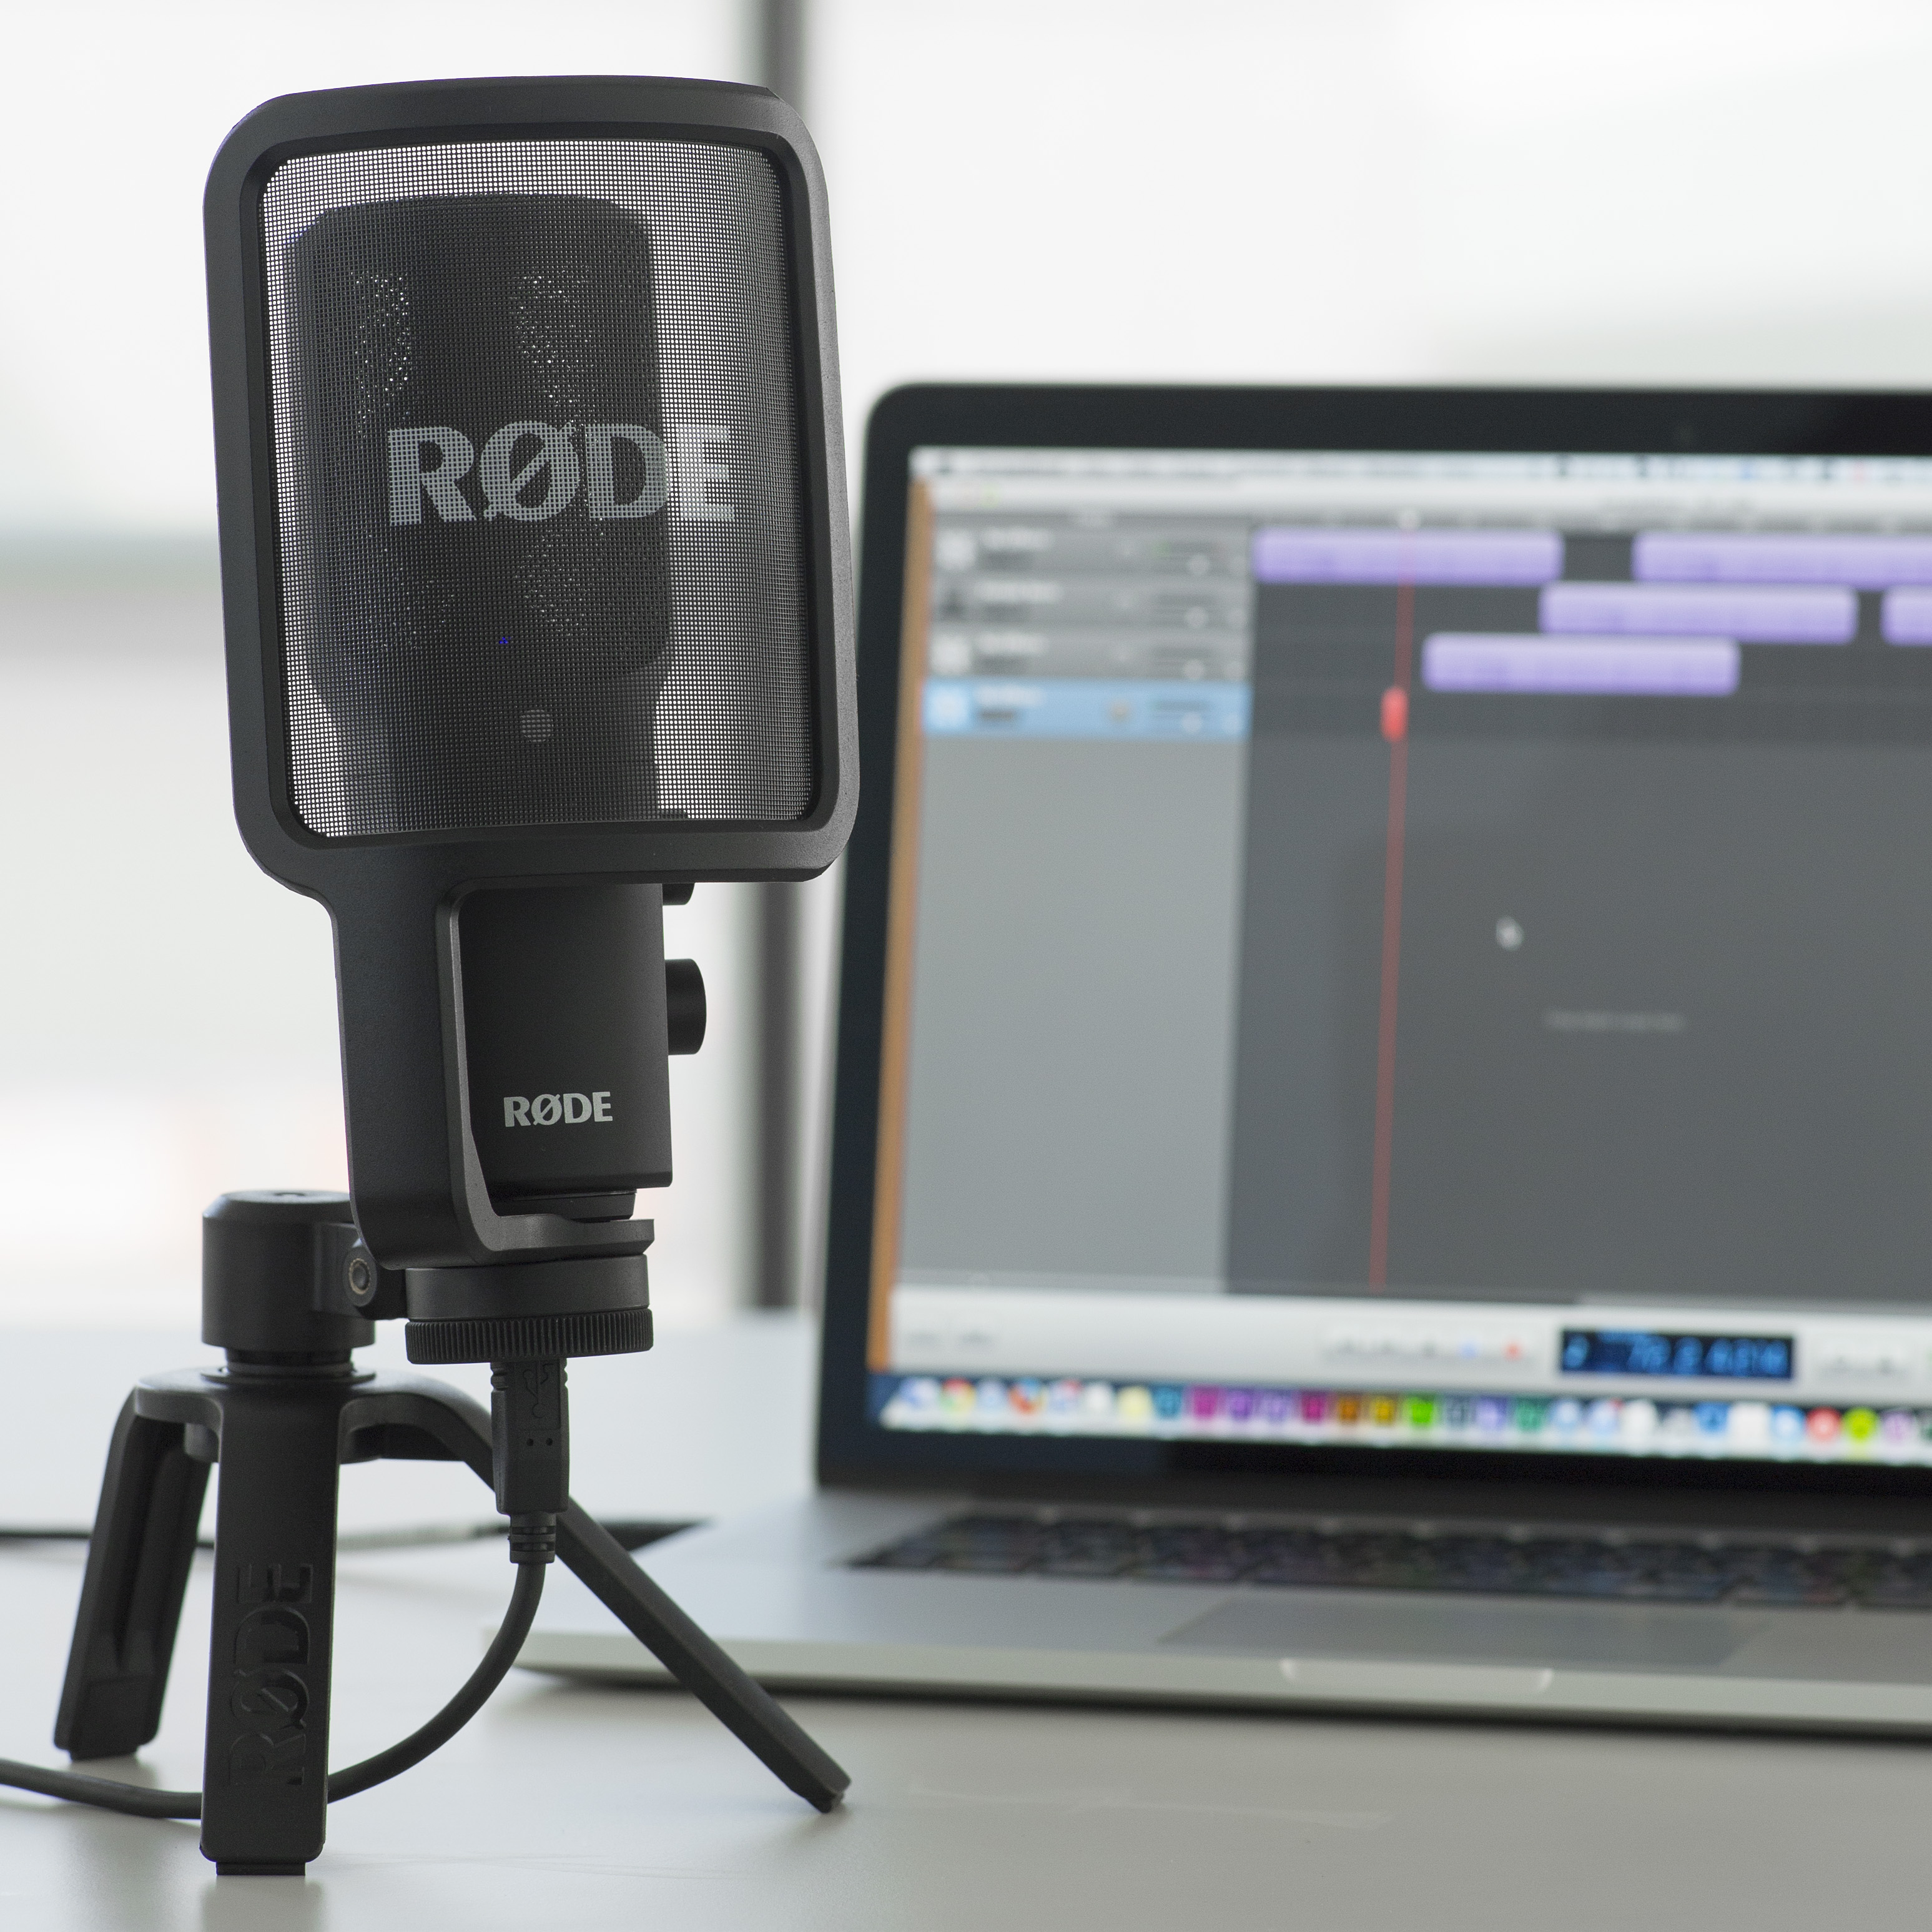 Enjoy Studio-quality recording on the go with the new RØDE NT-USB 24